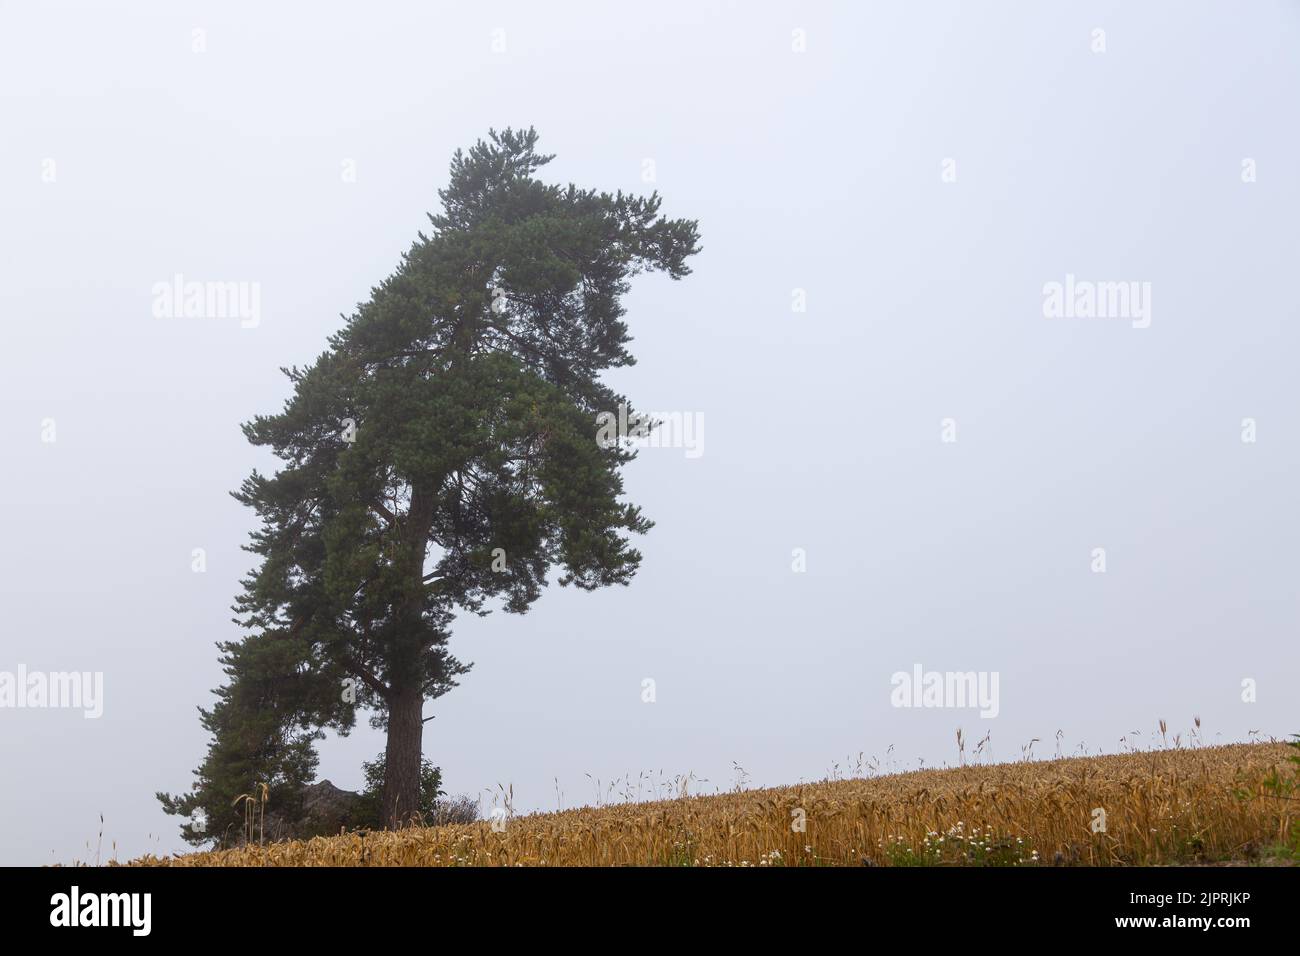 A lonely pine tree grows in a field in the countryside in Finland. The air is foggy and the sky is gray. Lots of empty space. Stock Photo